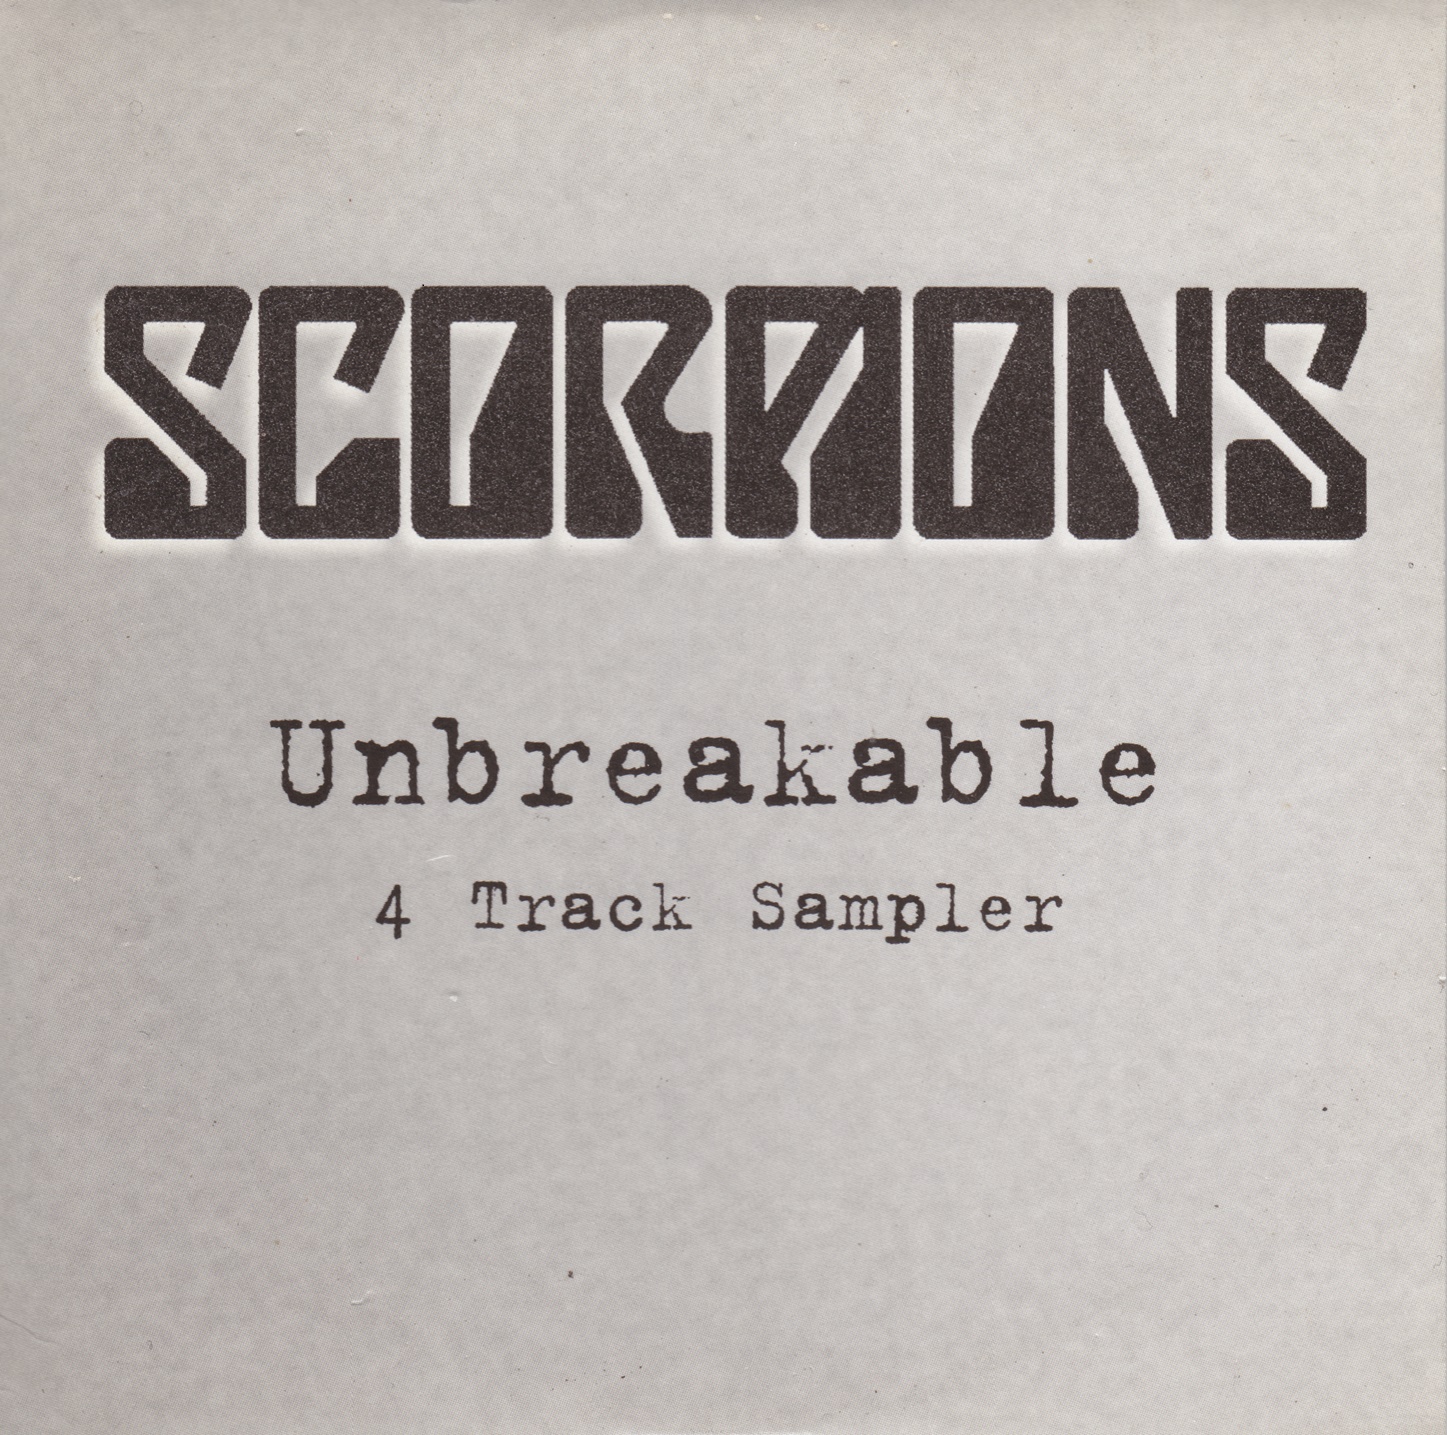 Scorpions flac. Scorpions Unbreakable 2004. Scorpions 2004 - Unbreakable CD. Scorpions альбом 2004. Scorpions 2004 Unbreakable Cover.